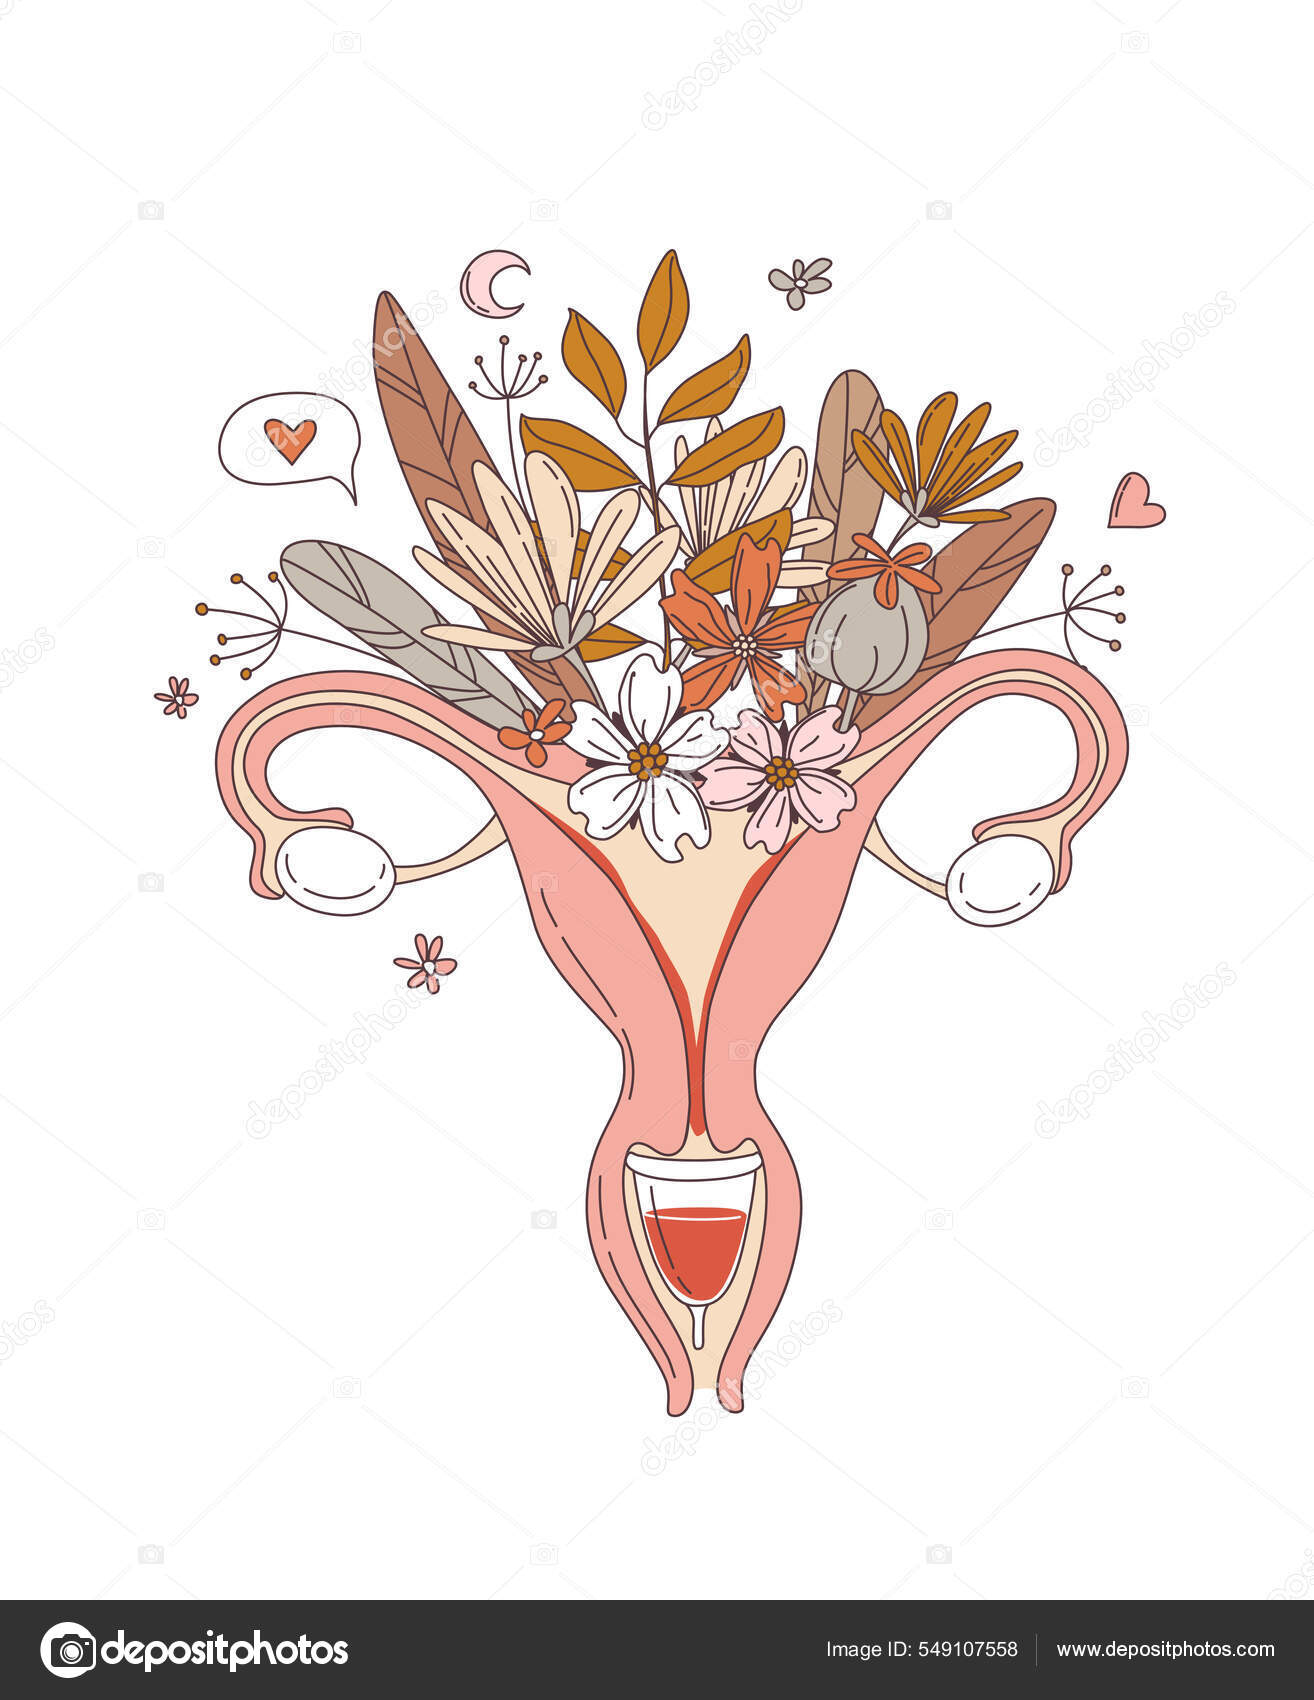 Female Anatomy | Structure and Functions | Studyclix